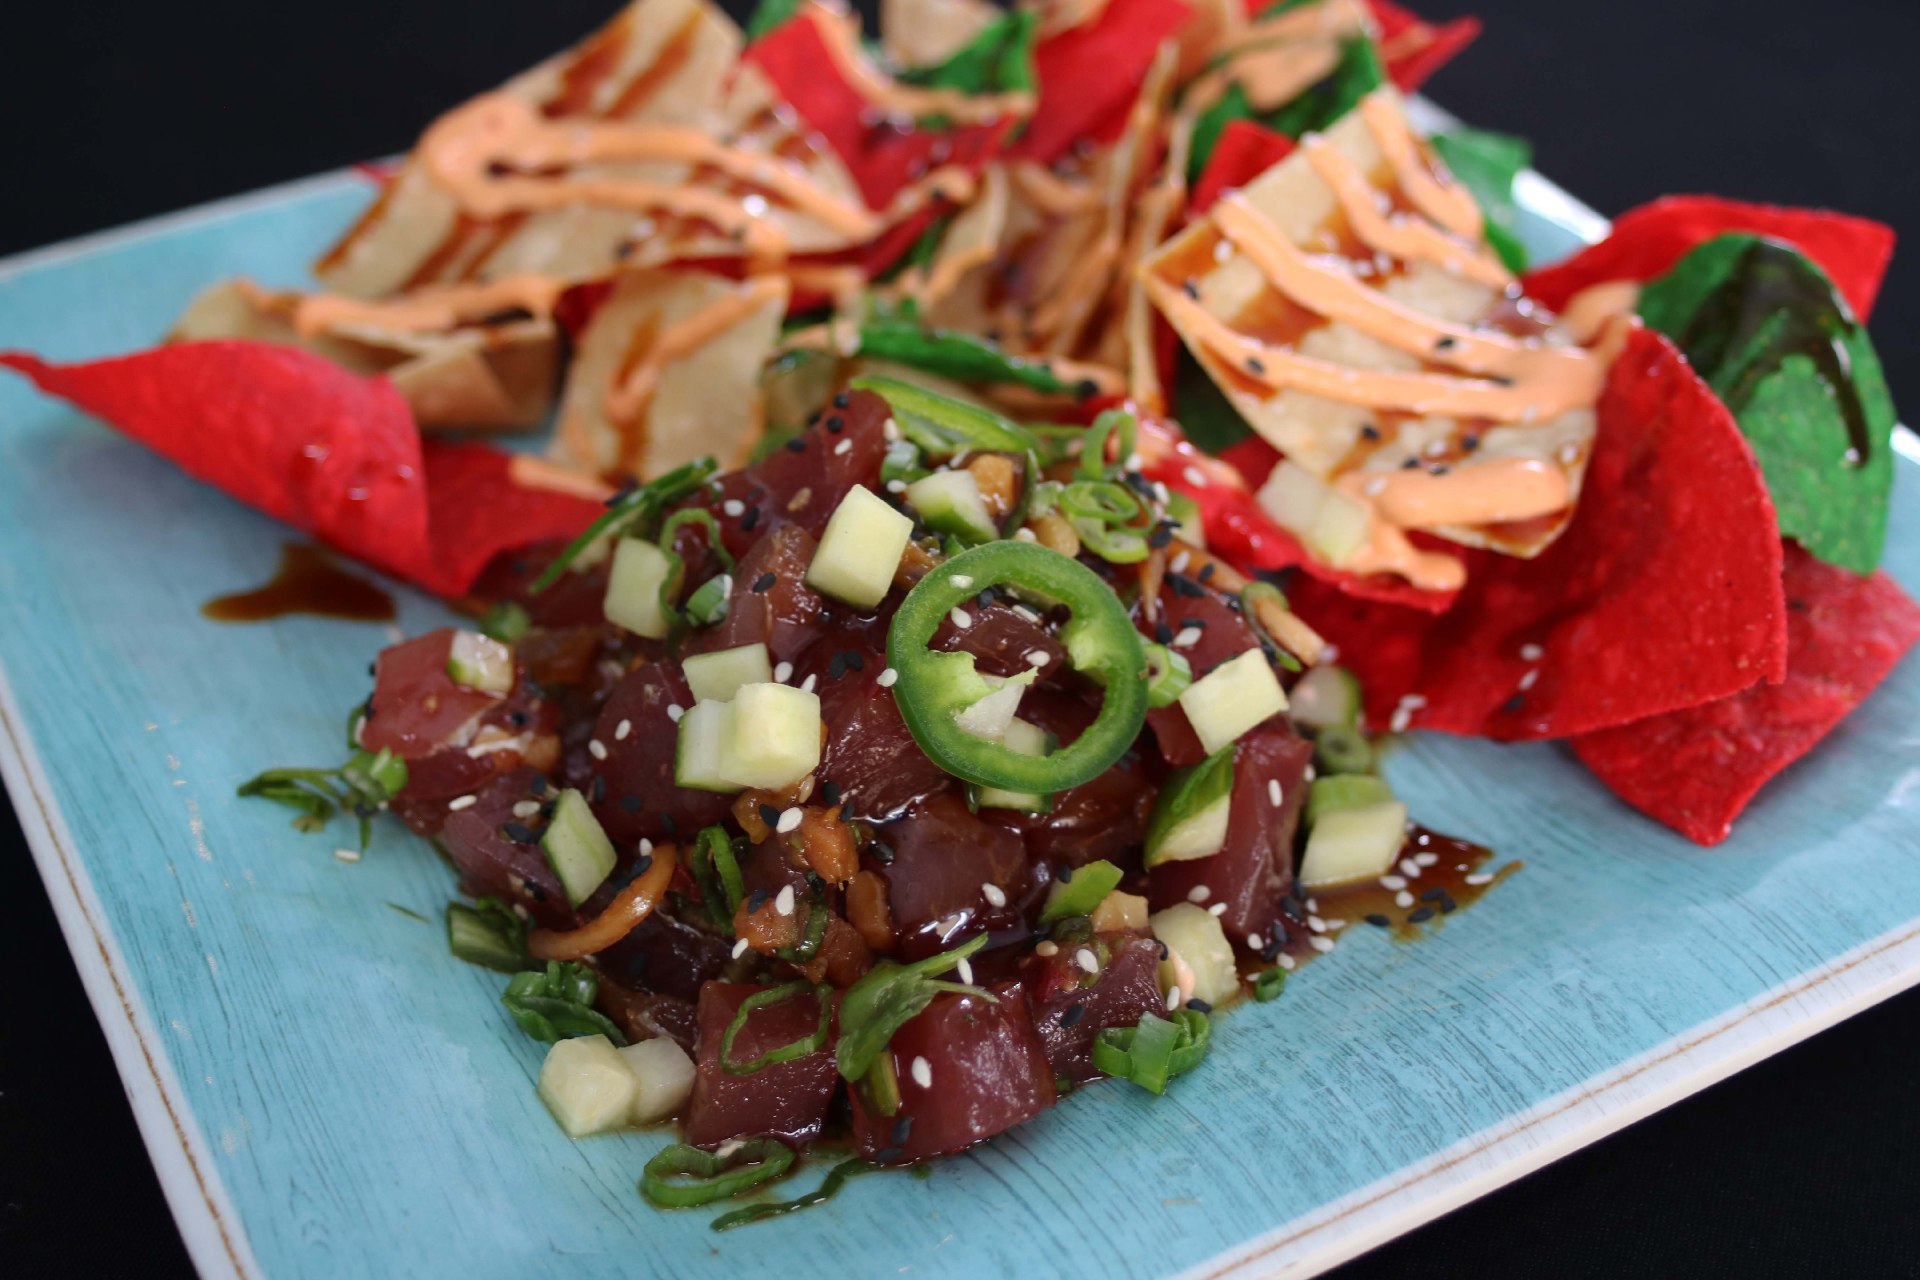 yellowfin tuna tossed with soy sauce, green onion, sesame oil, garlic and rice vinegar with tri-color corn tortilla chips